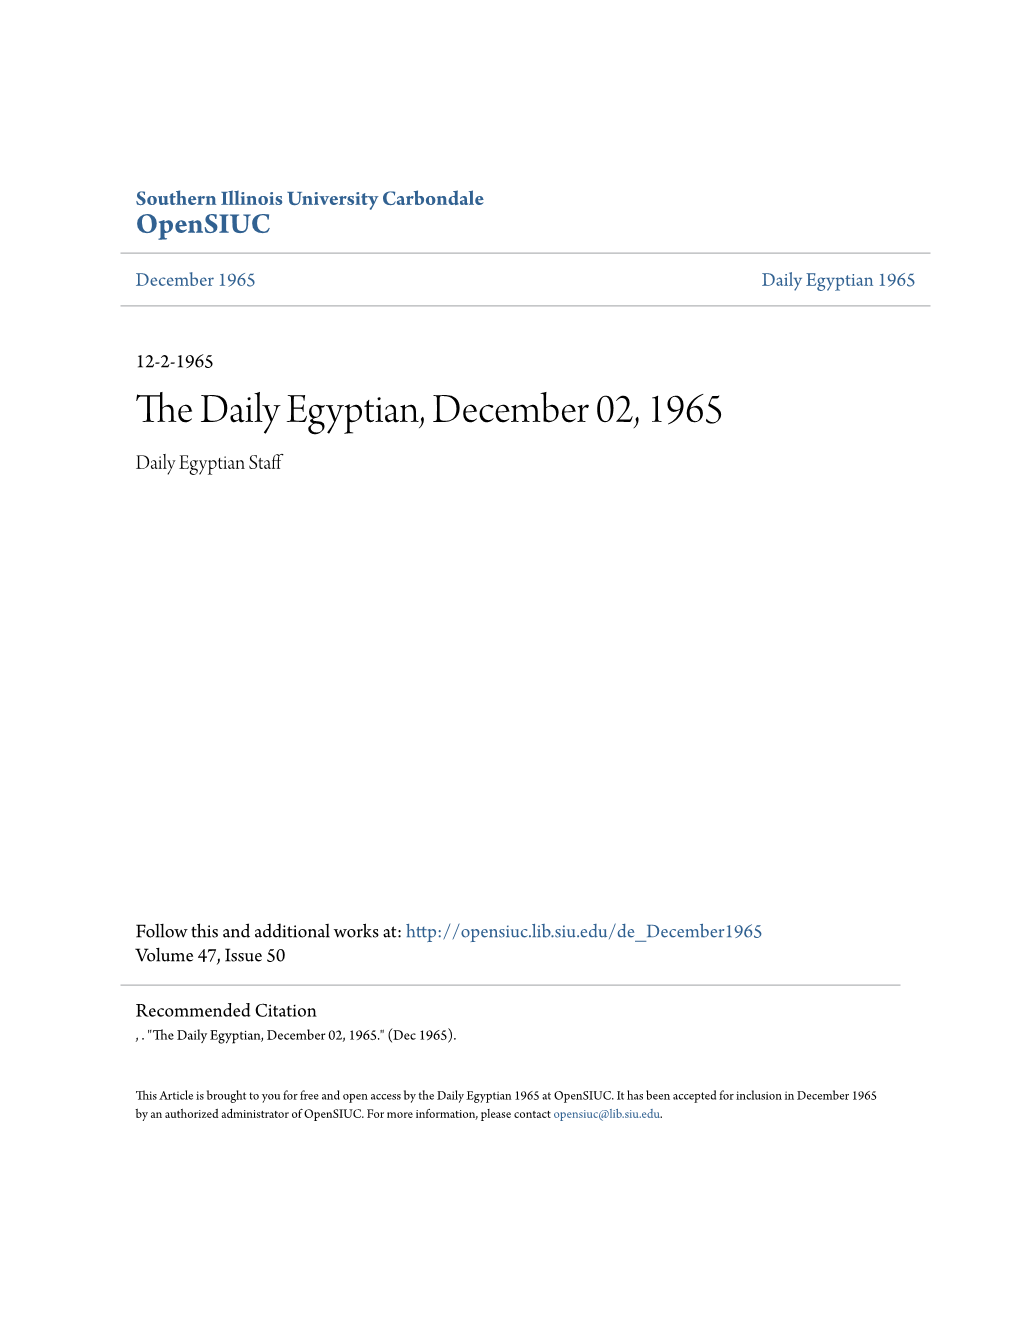 The Daily Egyptian, December 02, 1965